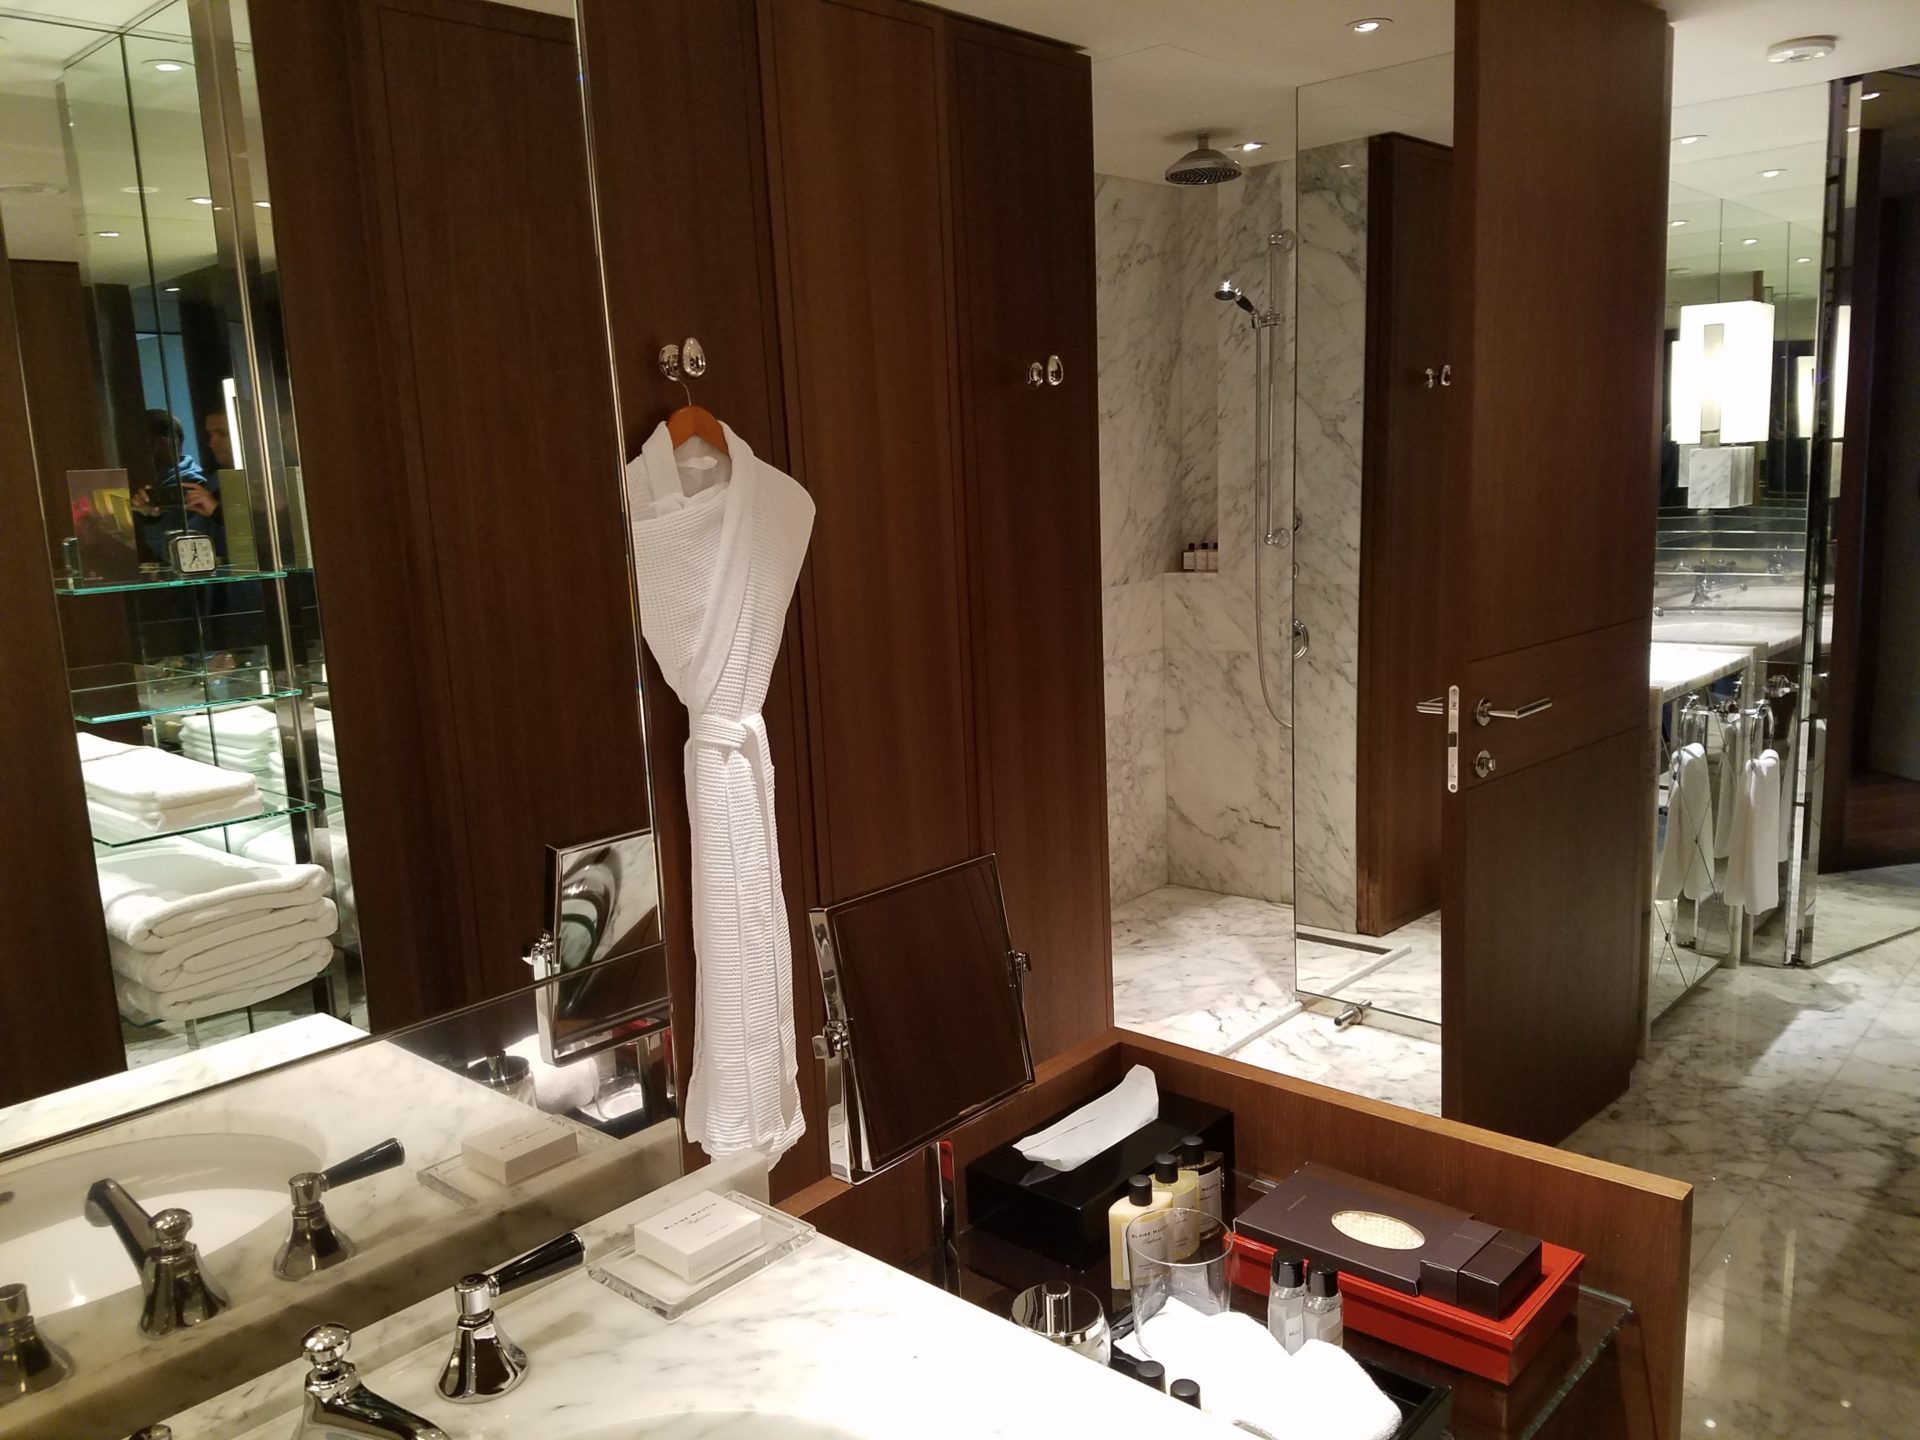 a bathroom with a white robe on a hook